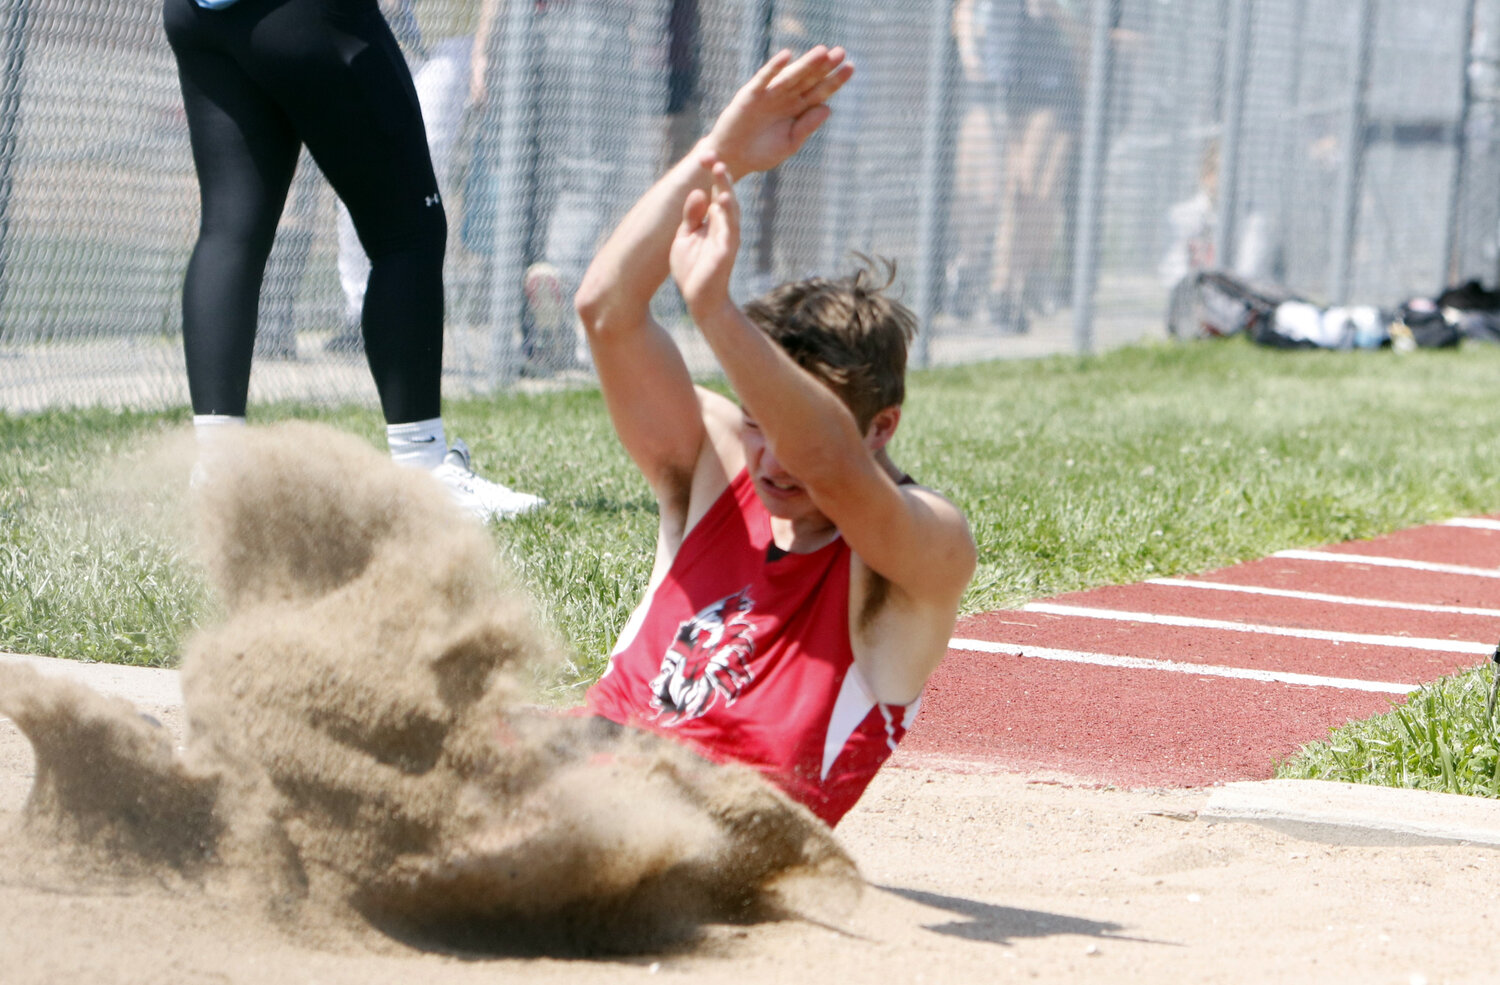 Colton Brosenne lands in the sand pit during the long jump competition.